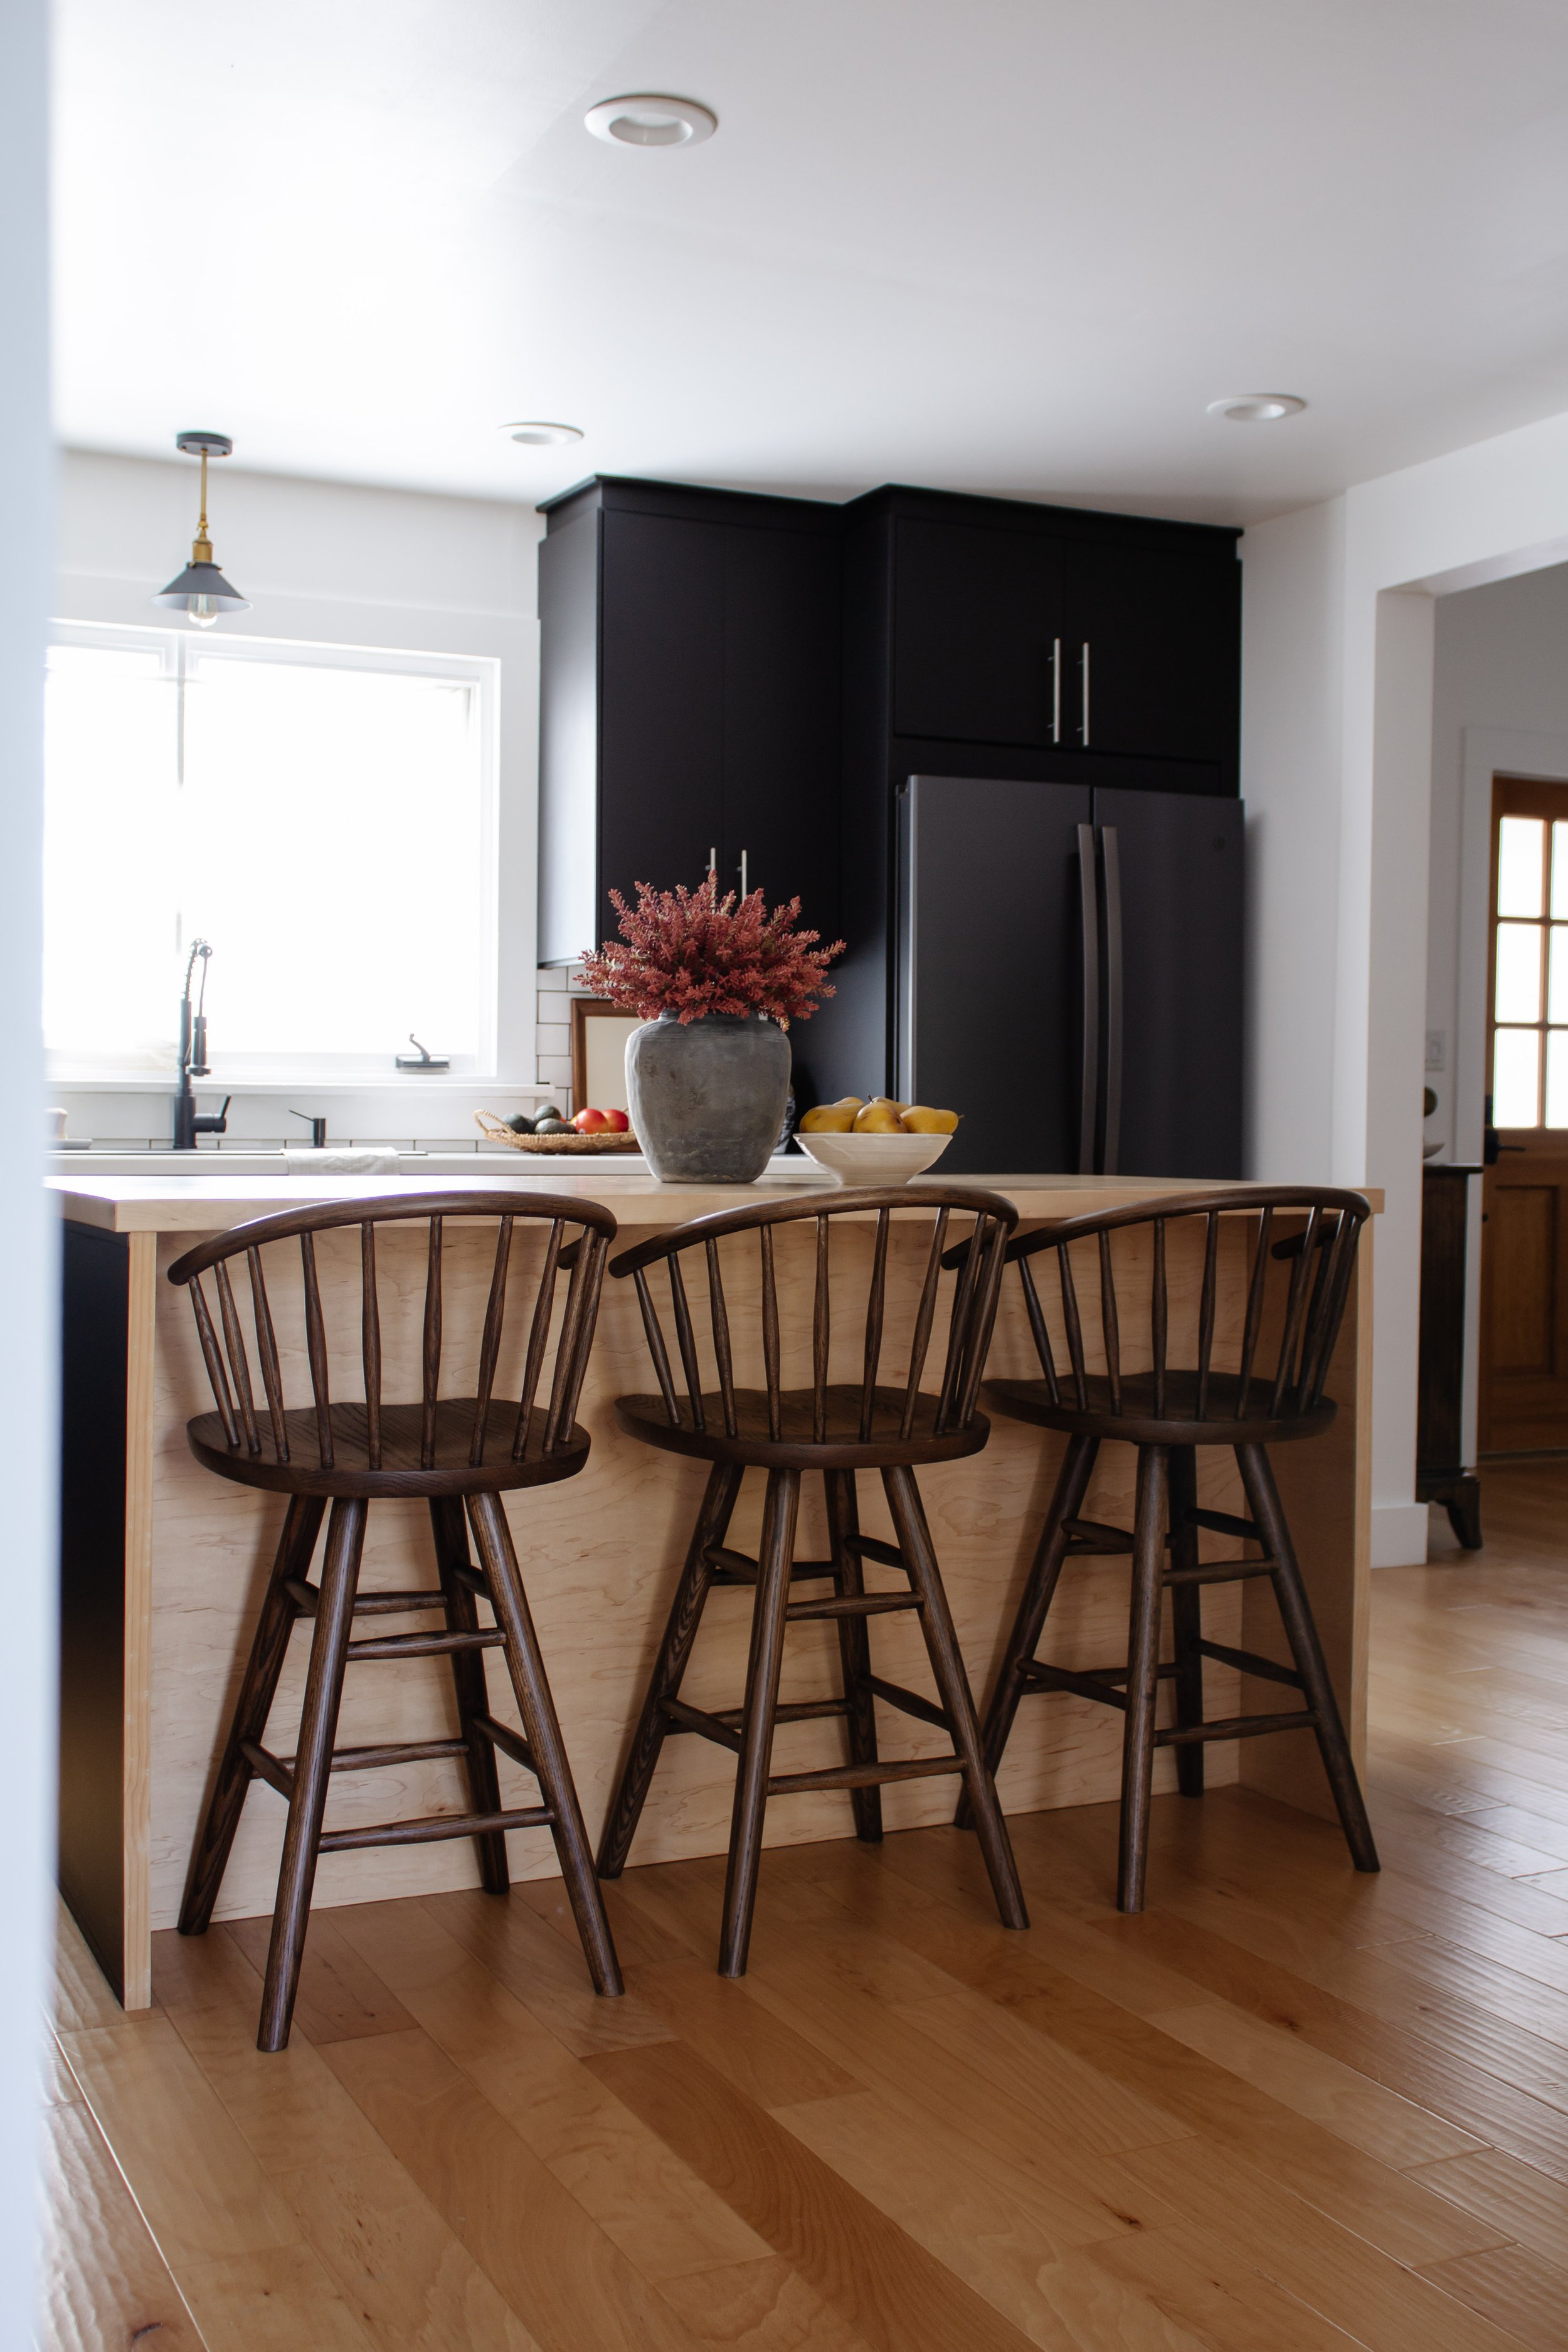 How to refinish oak wood counter stools - Nadine Stay | Furniture flip makeover on three spindle back counter stools. How to make golden oak wood look high end. My favorite dark stain color. Kitchen counter stool inspiration. Modern cabin kitchen.